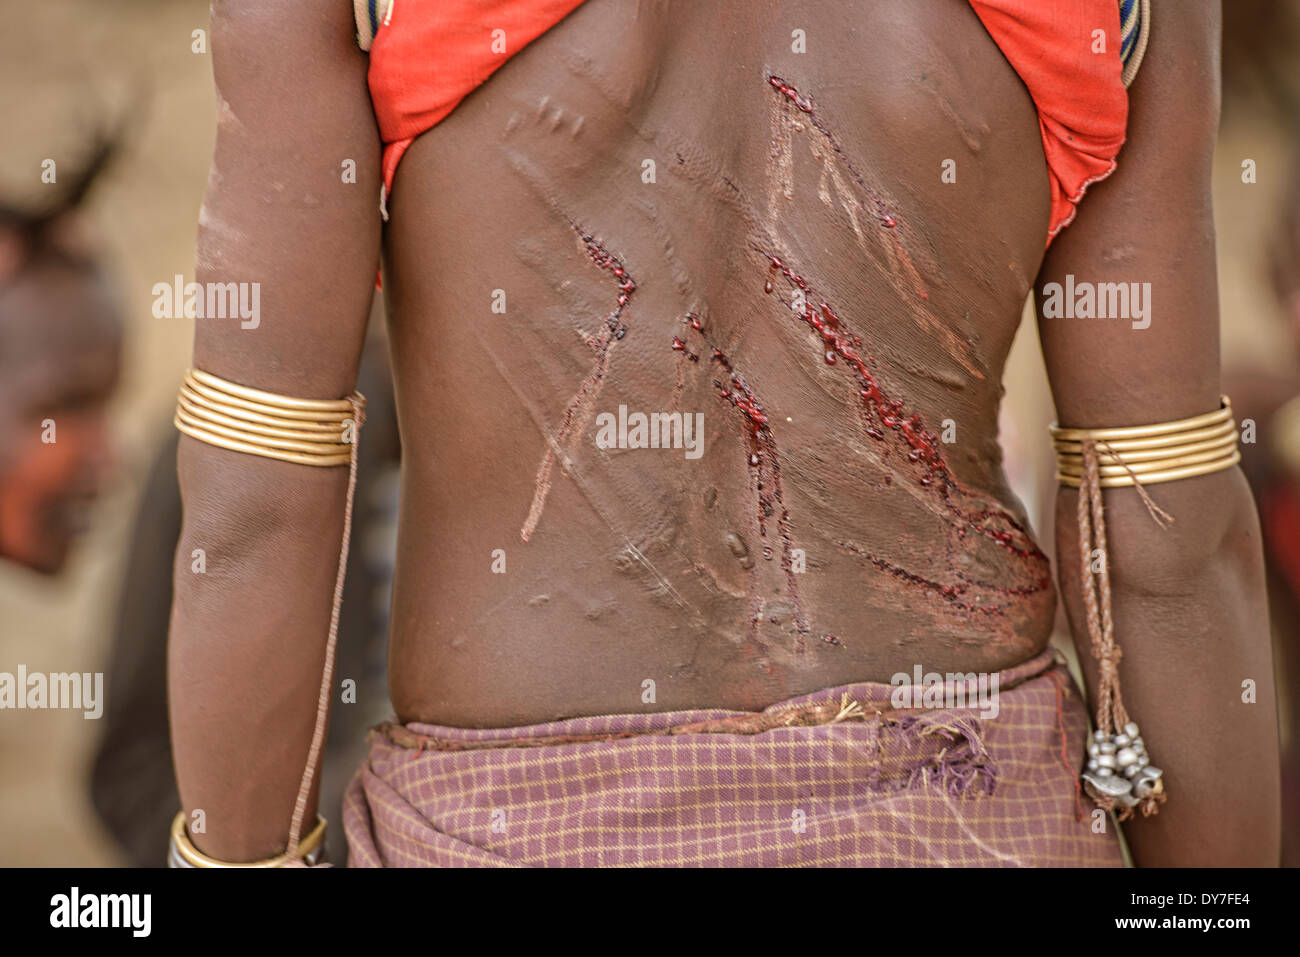 Hamer woman's back after being whipped at a bull jumping ceremony ...